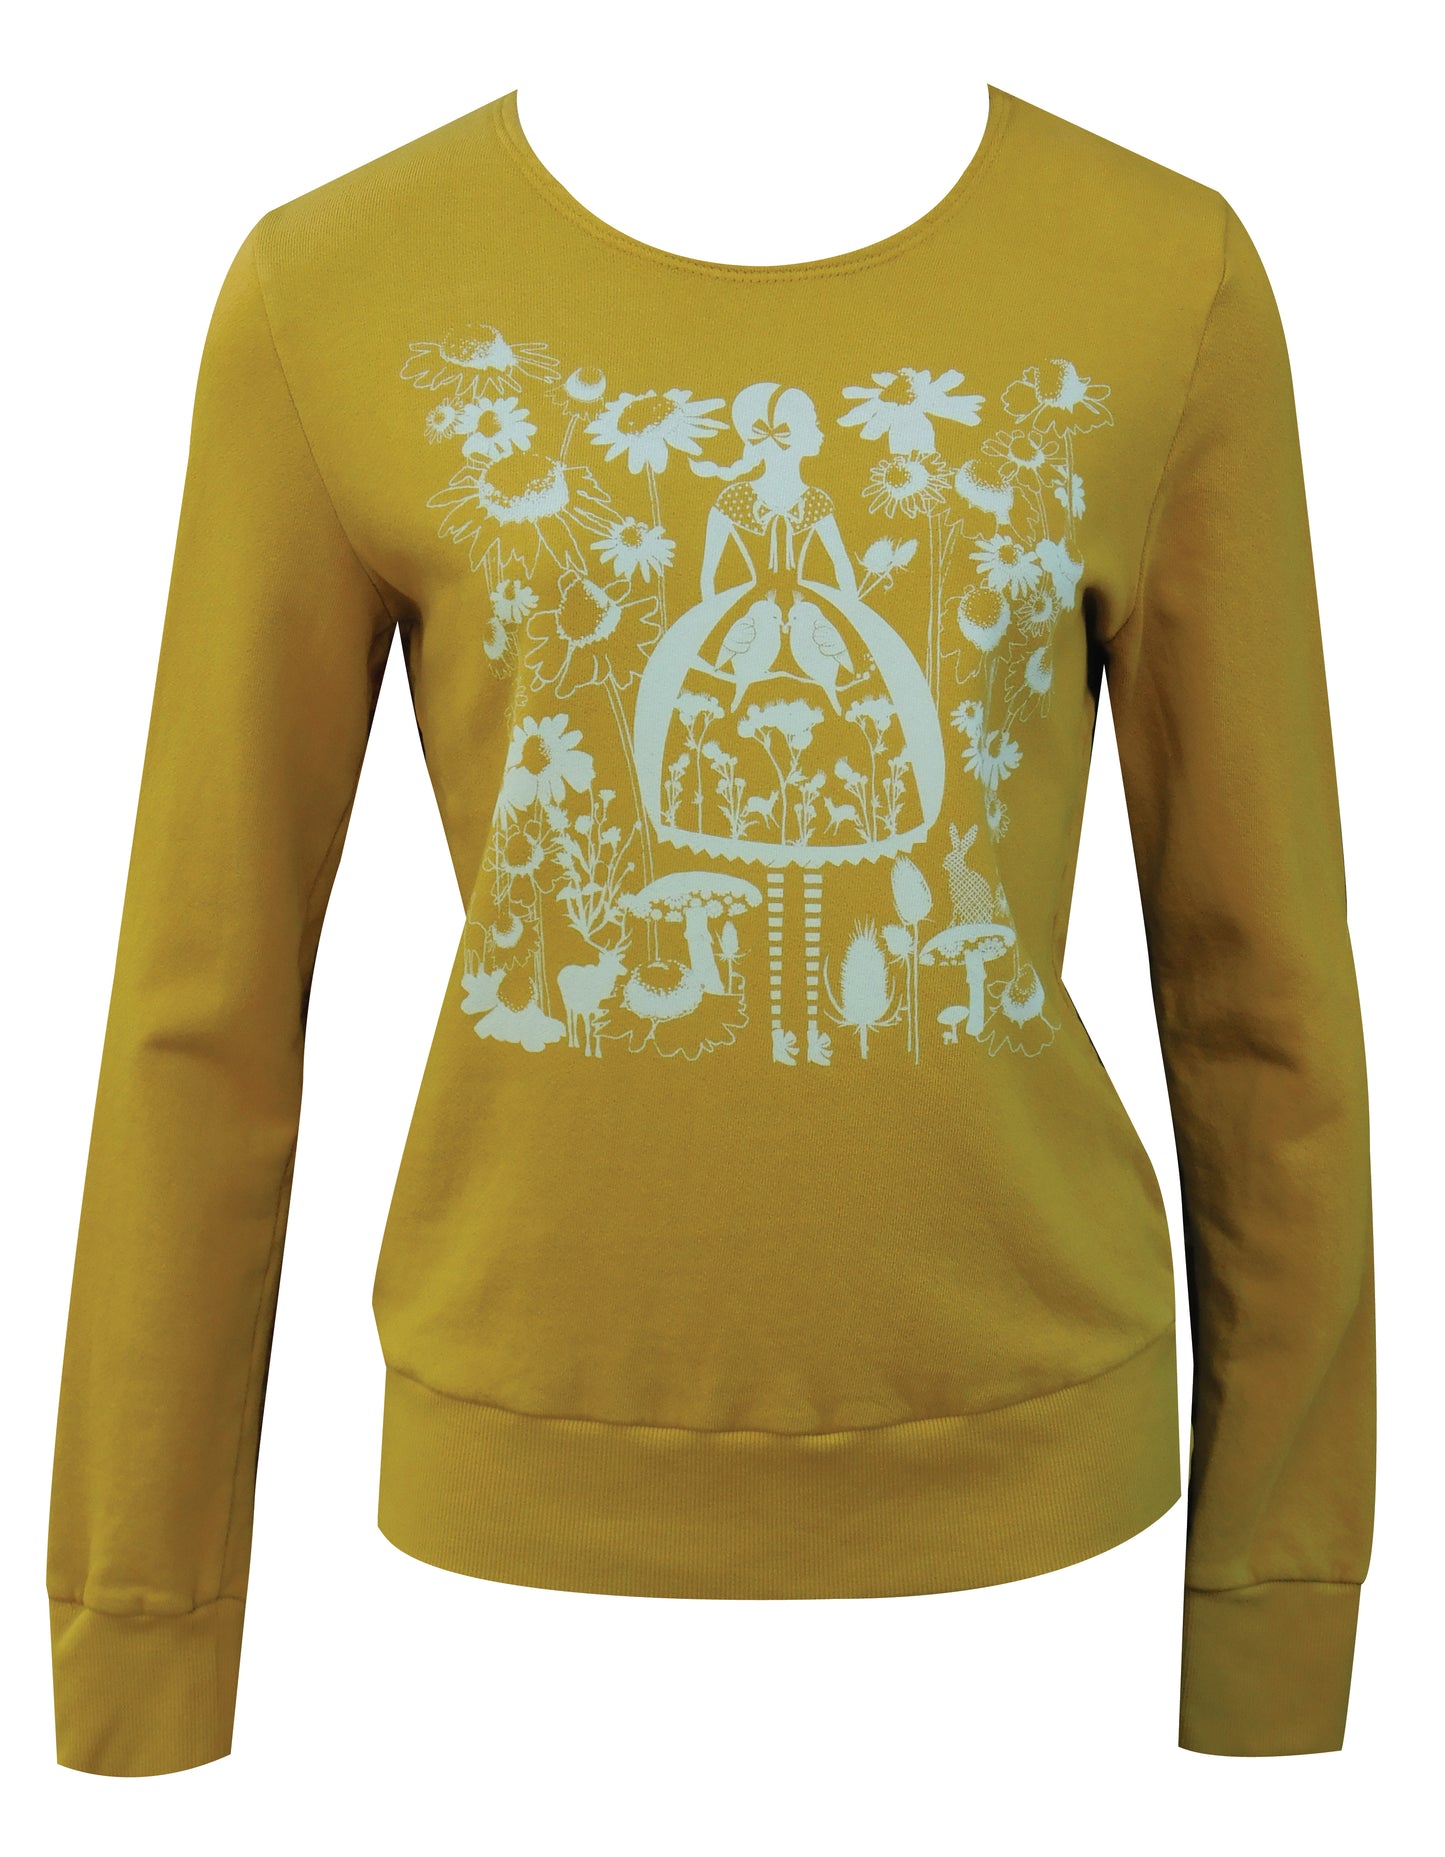 Yellow sweatshirt with white screen print of cute girl surrounded by flora and fauna